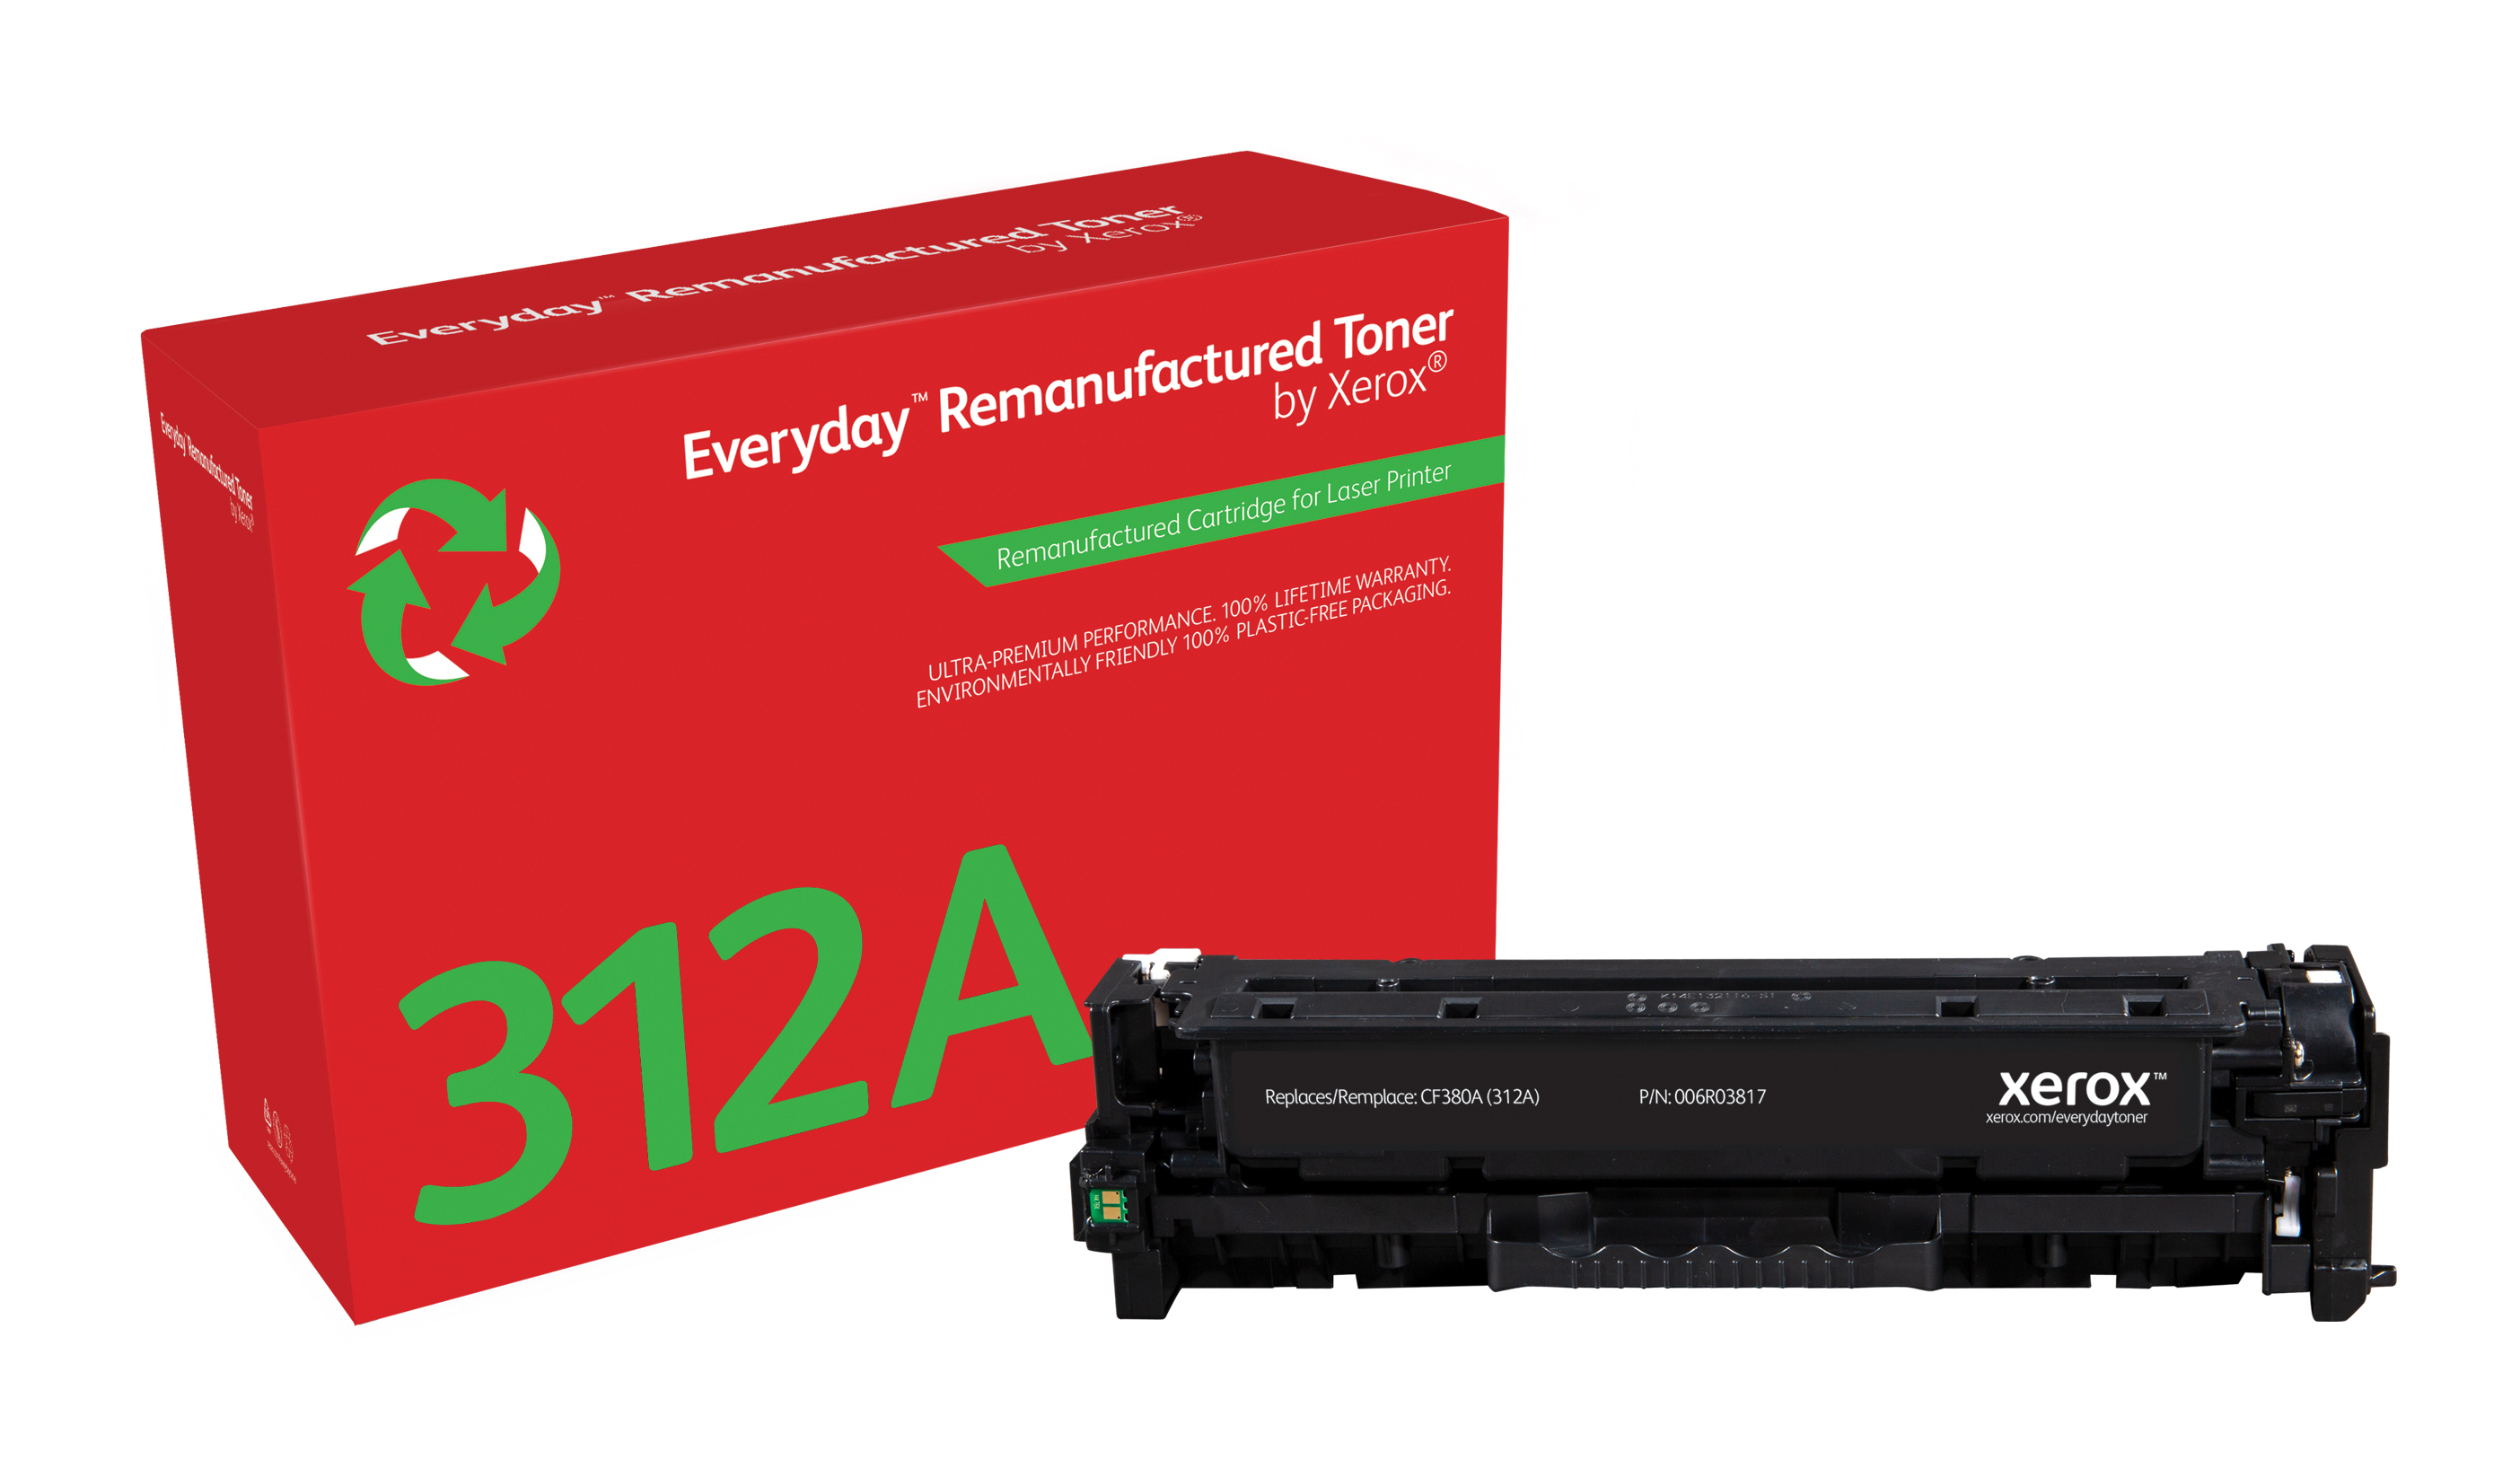 Toner Everyday Noir compatible avec HP 312A (CF380A) 006R03817 by Xerox